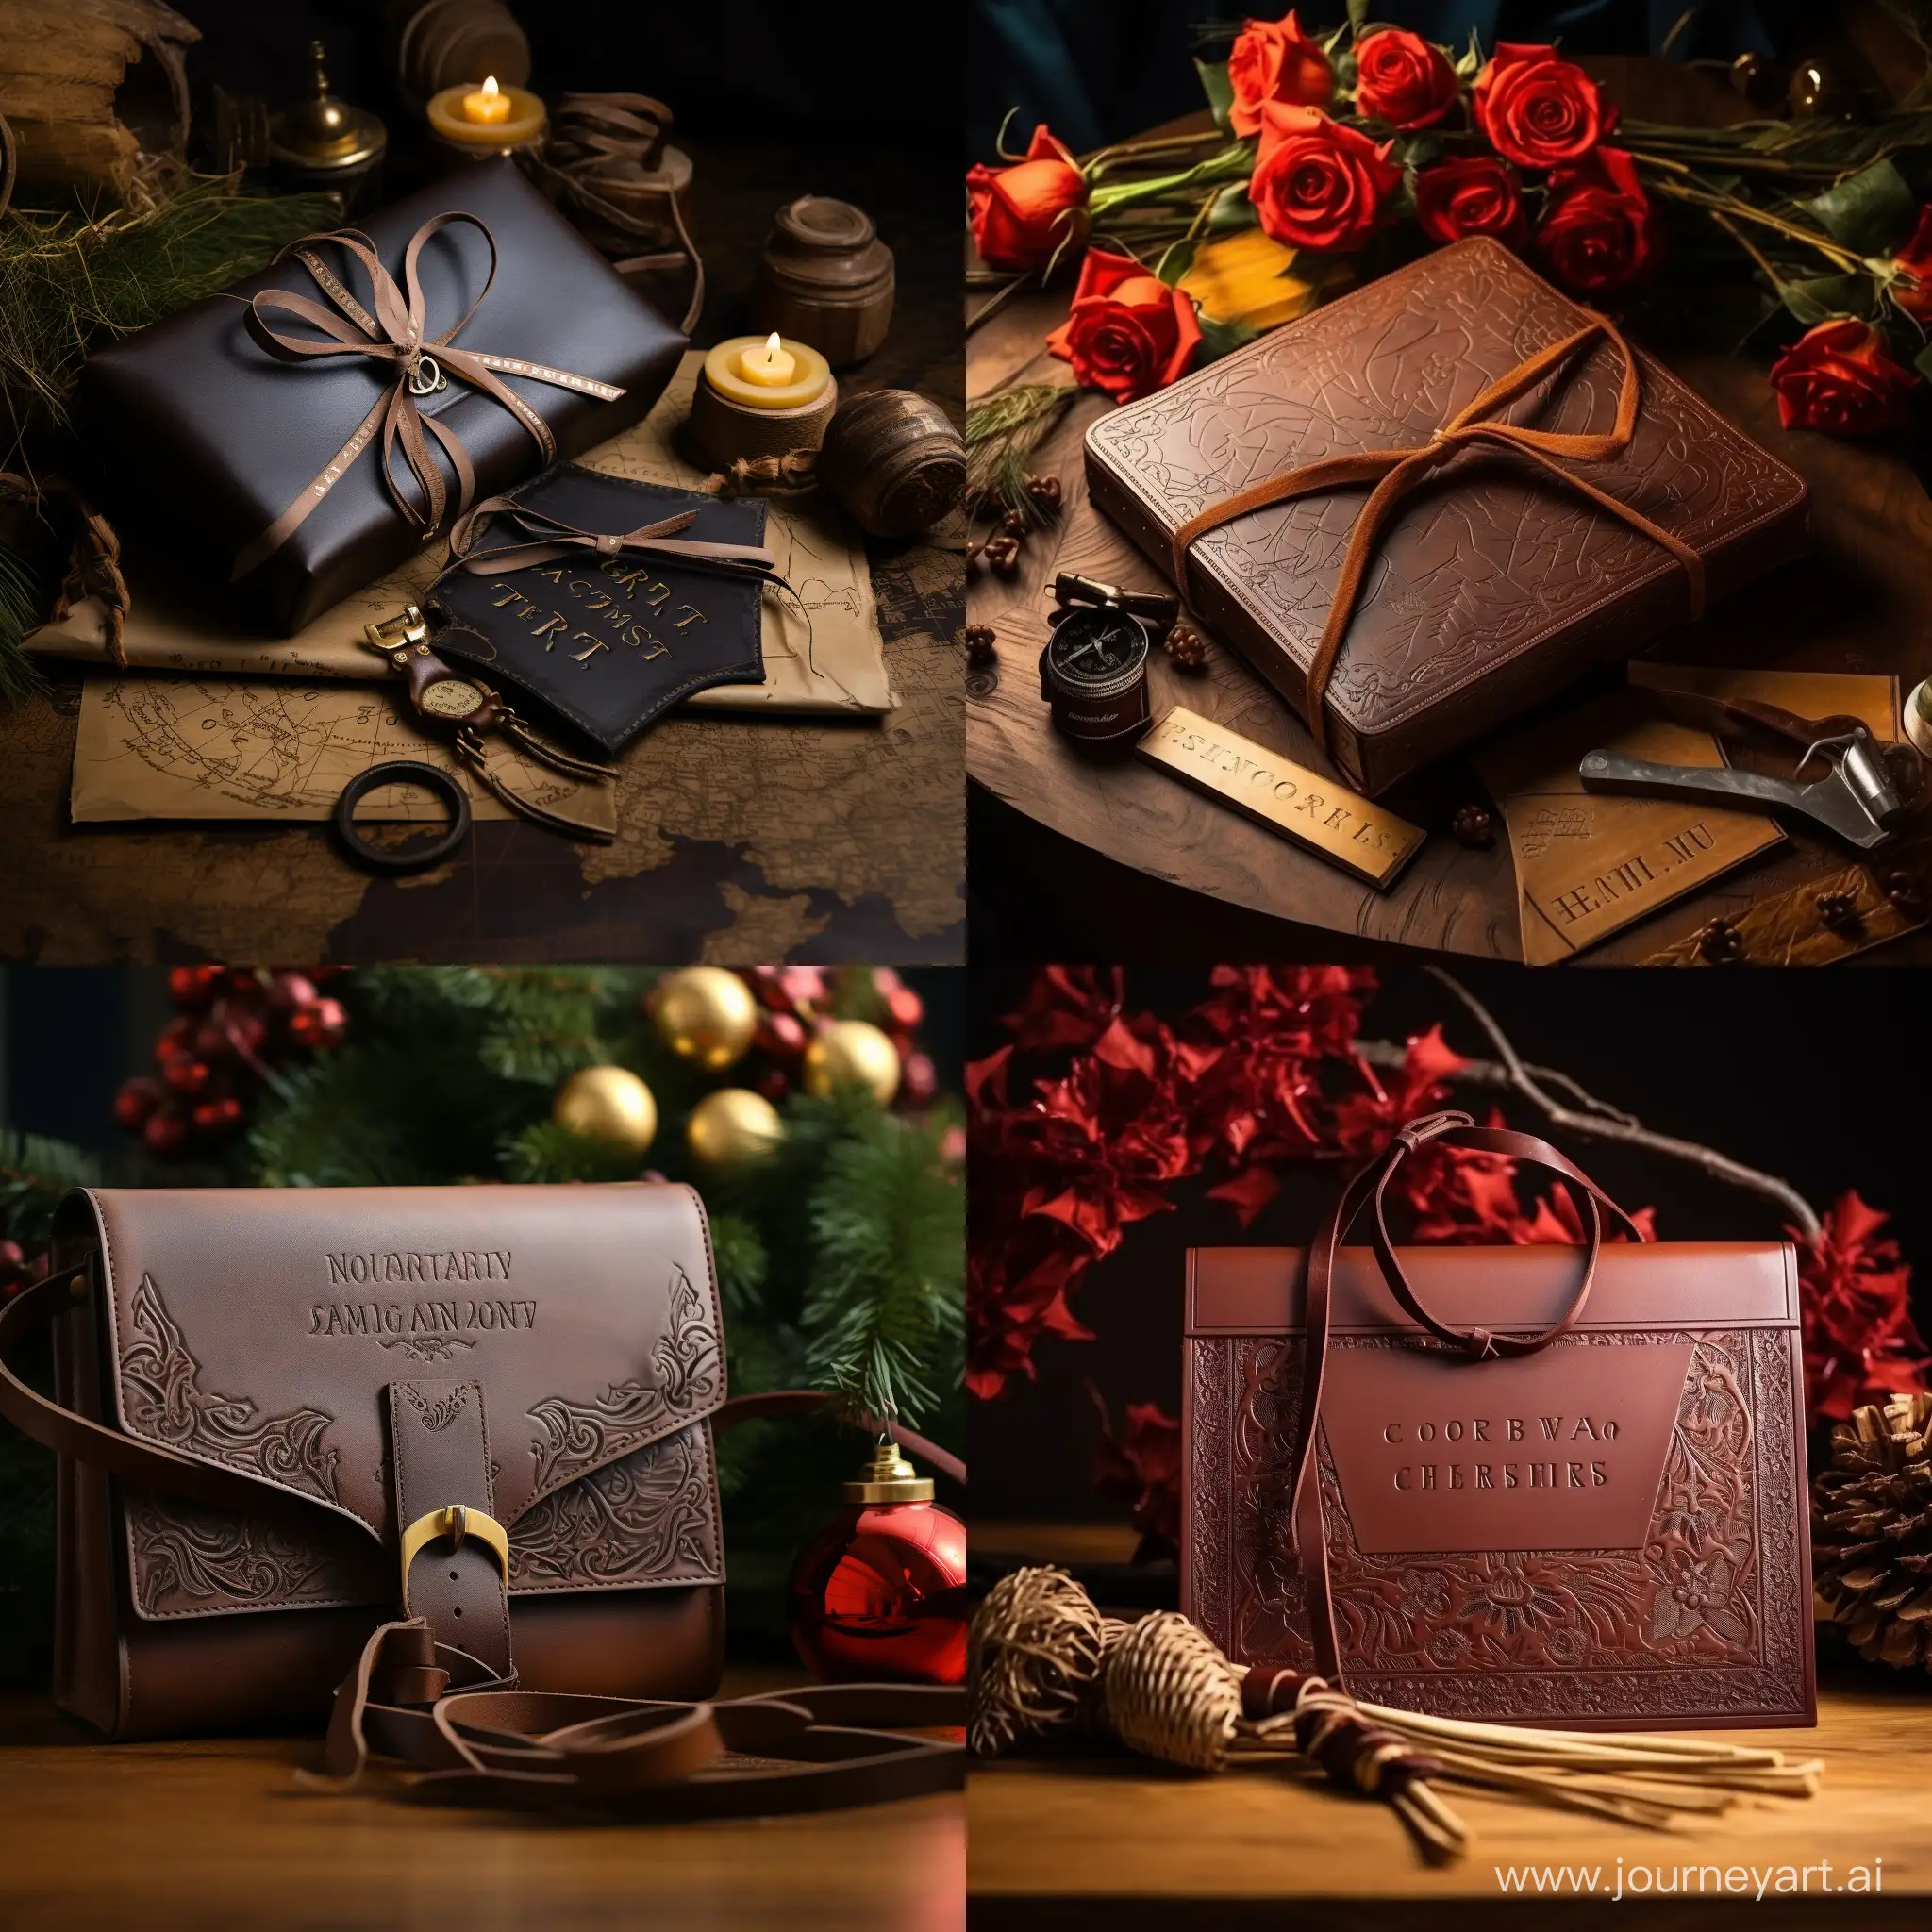 New-Years-Eve-Elegance-SevCraft-Leather-Goods-Adorned-with-Festive-Decor